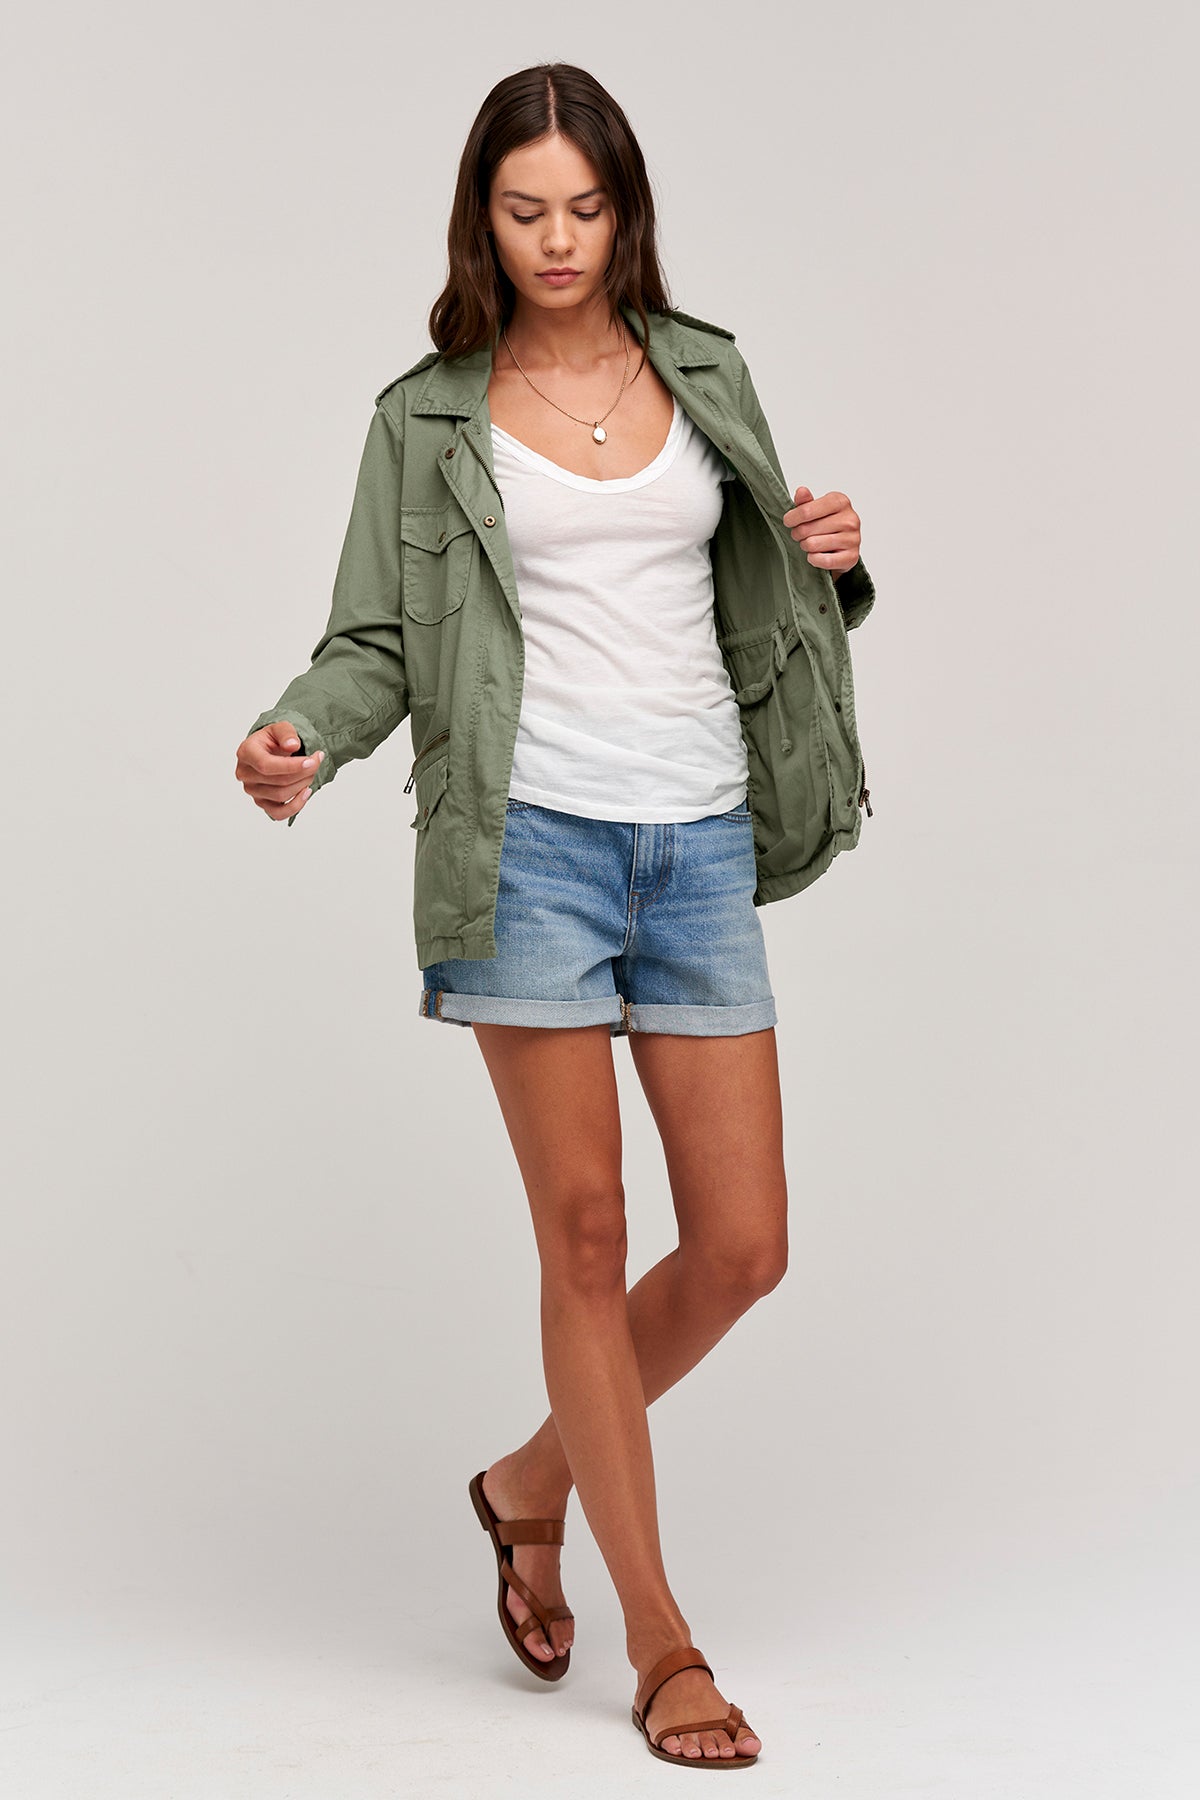 A woman wearing a RUBY LIGHT-WEIGHT ARMY JACKET by Velvet by Graham & Spencer and shorts.-35207196377281